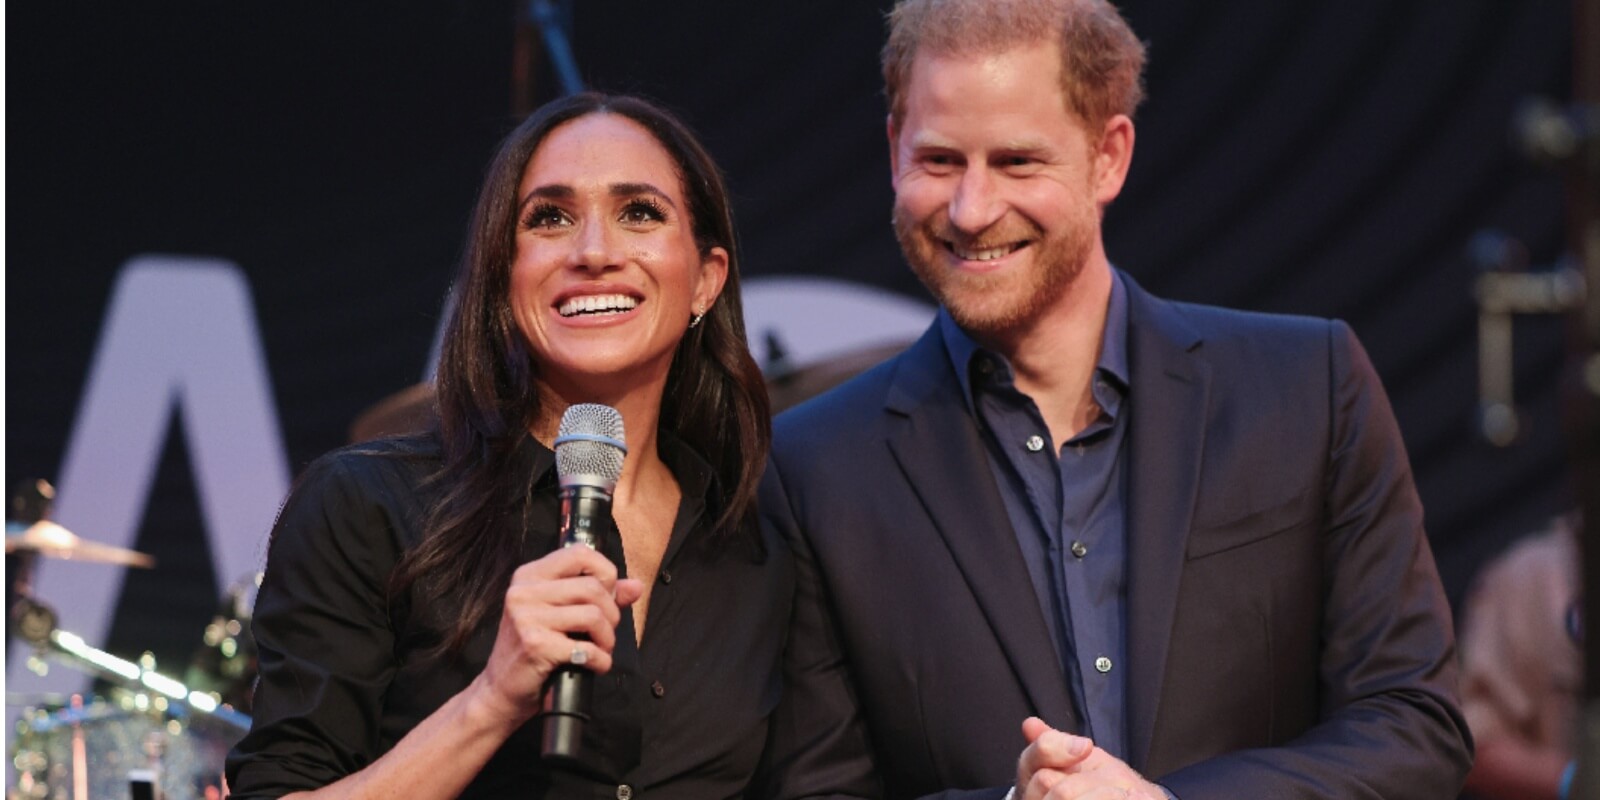 Meghan Markle and Prince Harry speak at the Friends and Family event at the Invictus Games 2023.